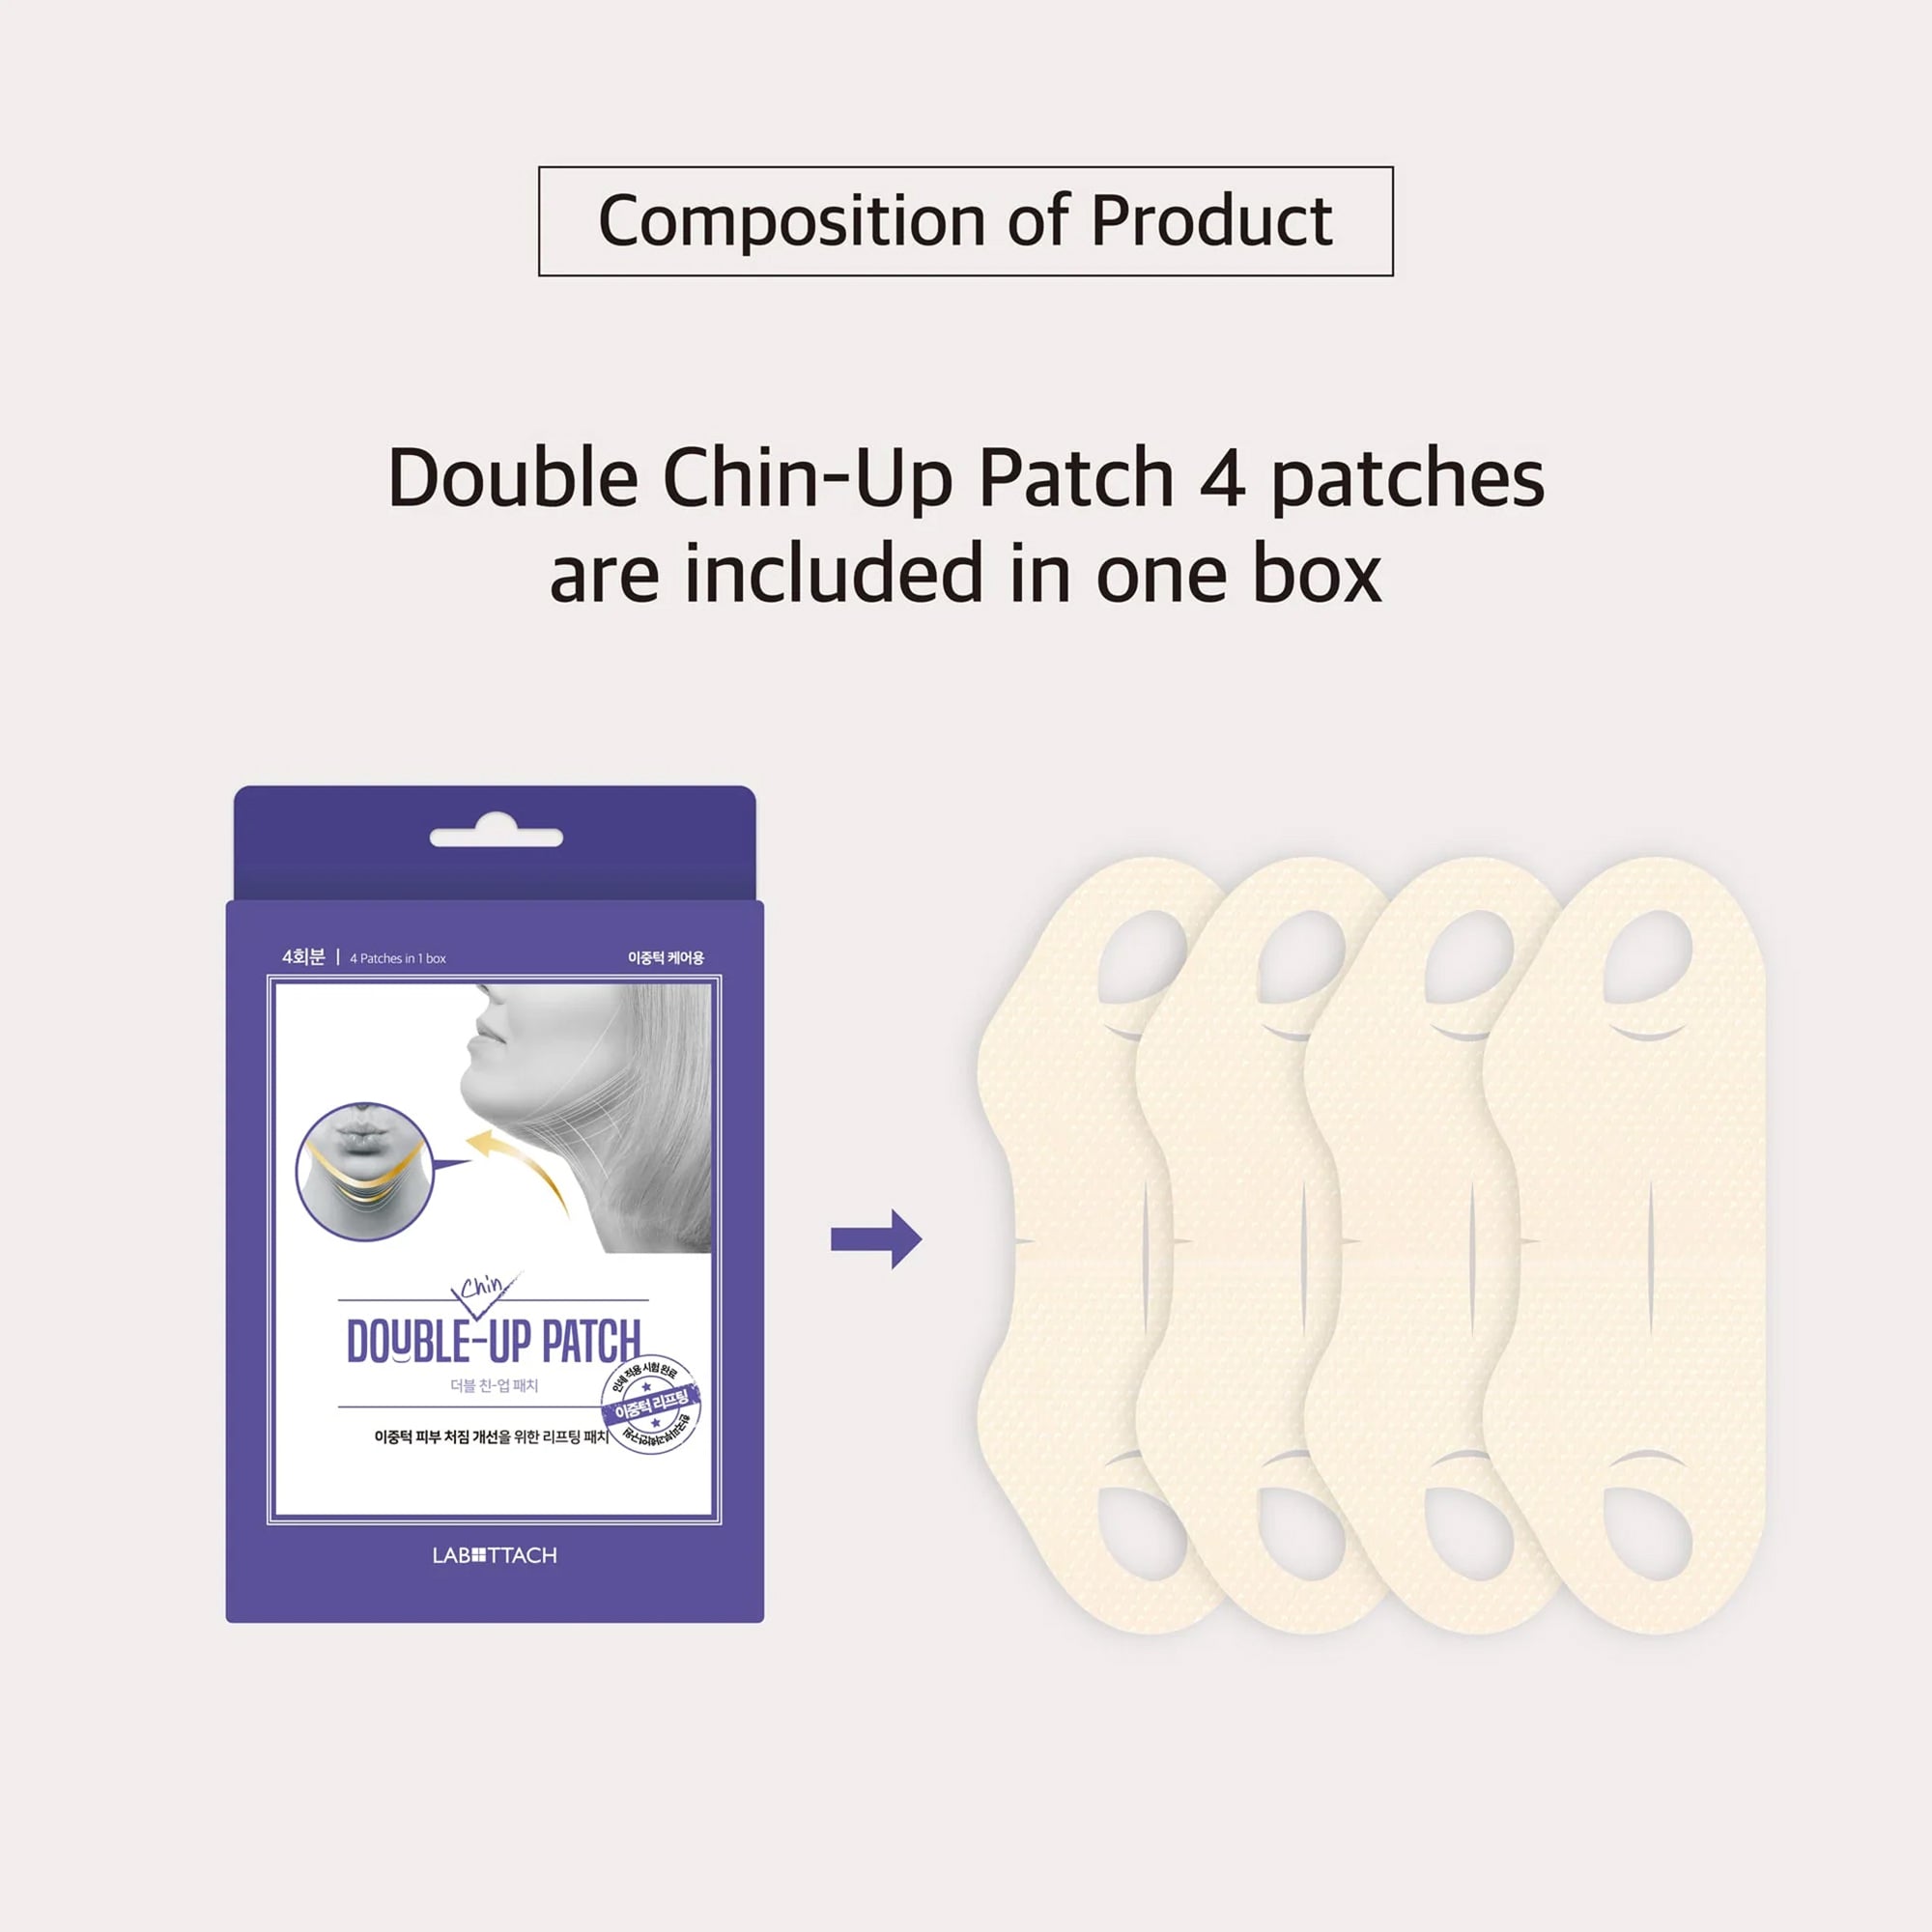 Double-Chin Up Patch